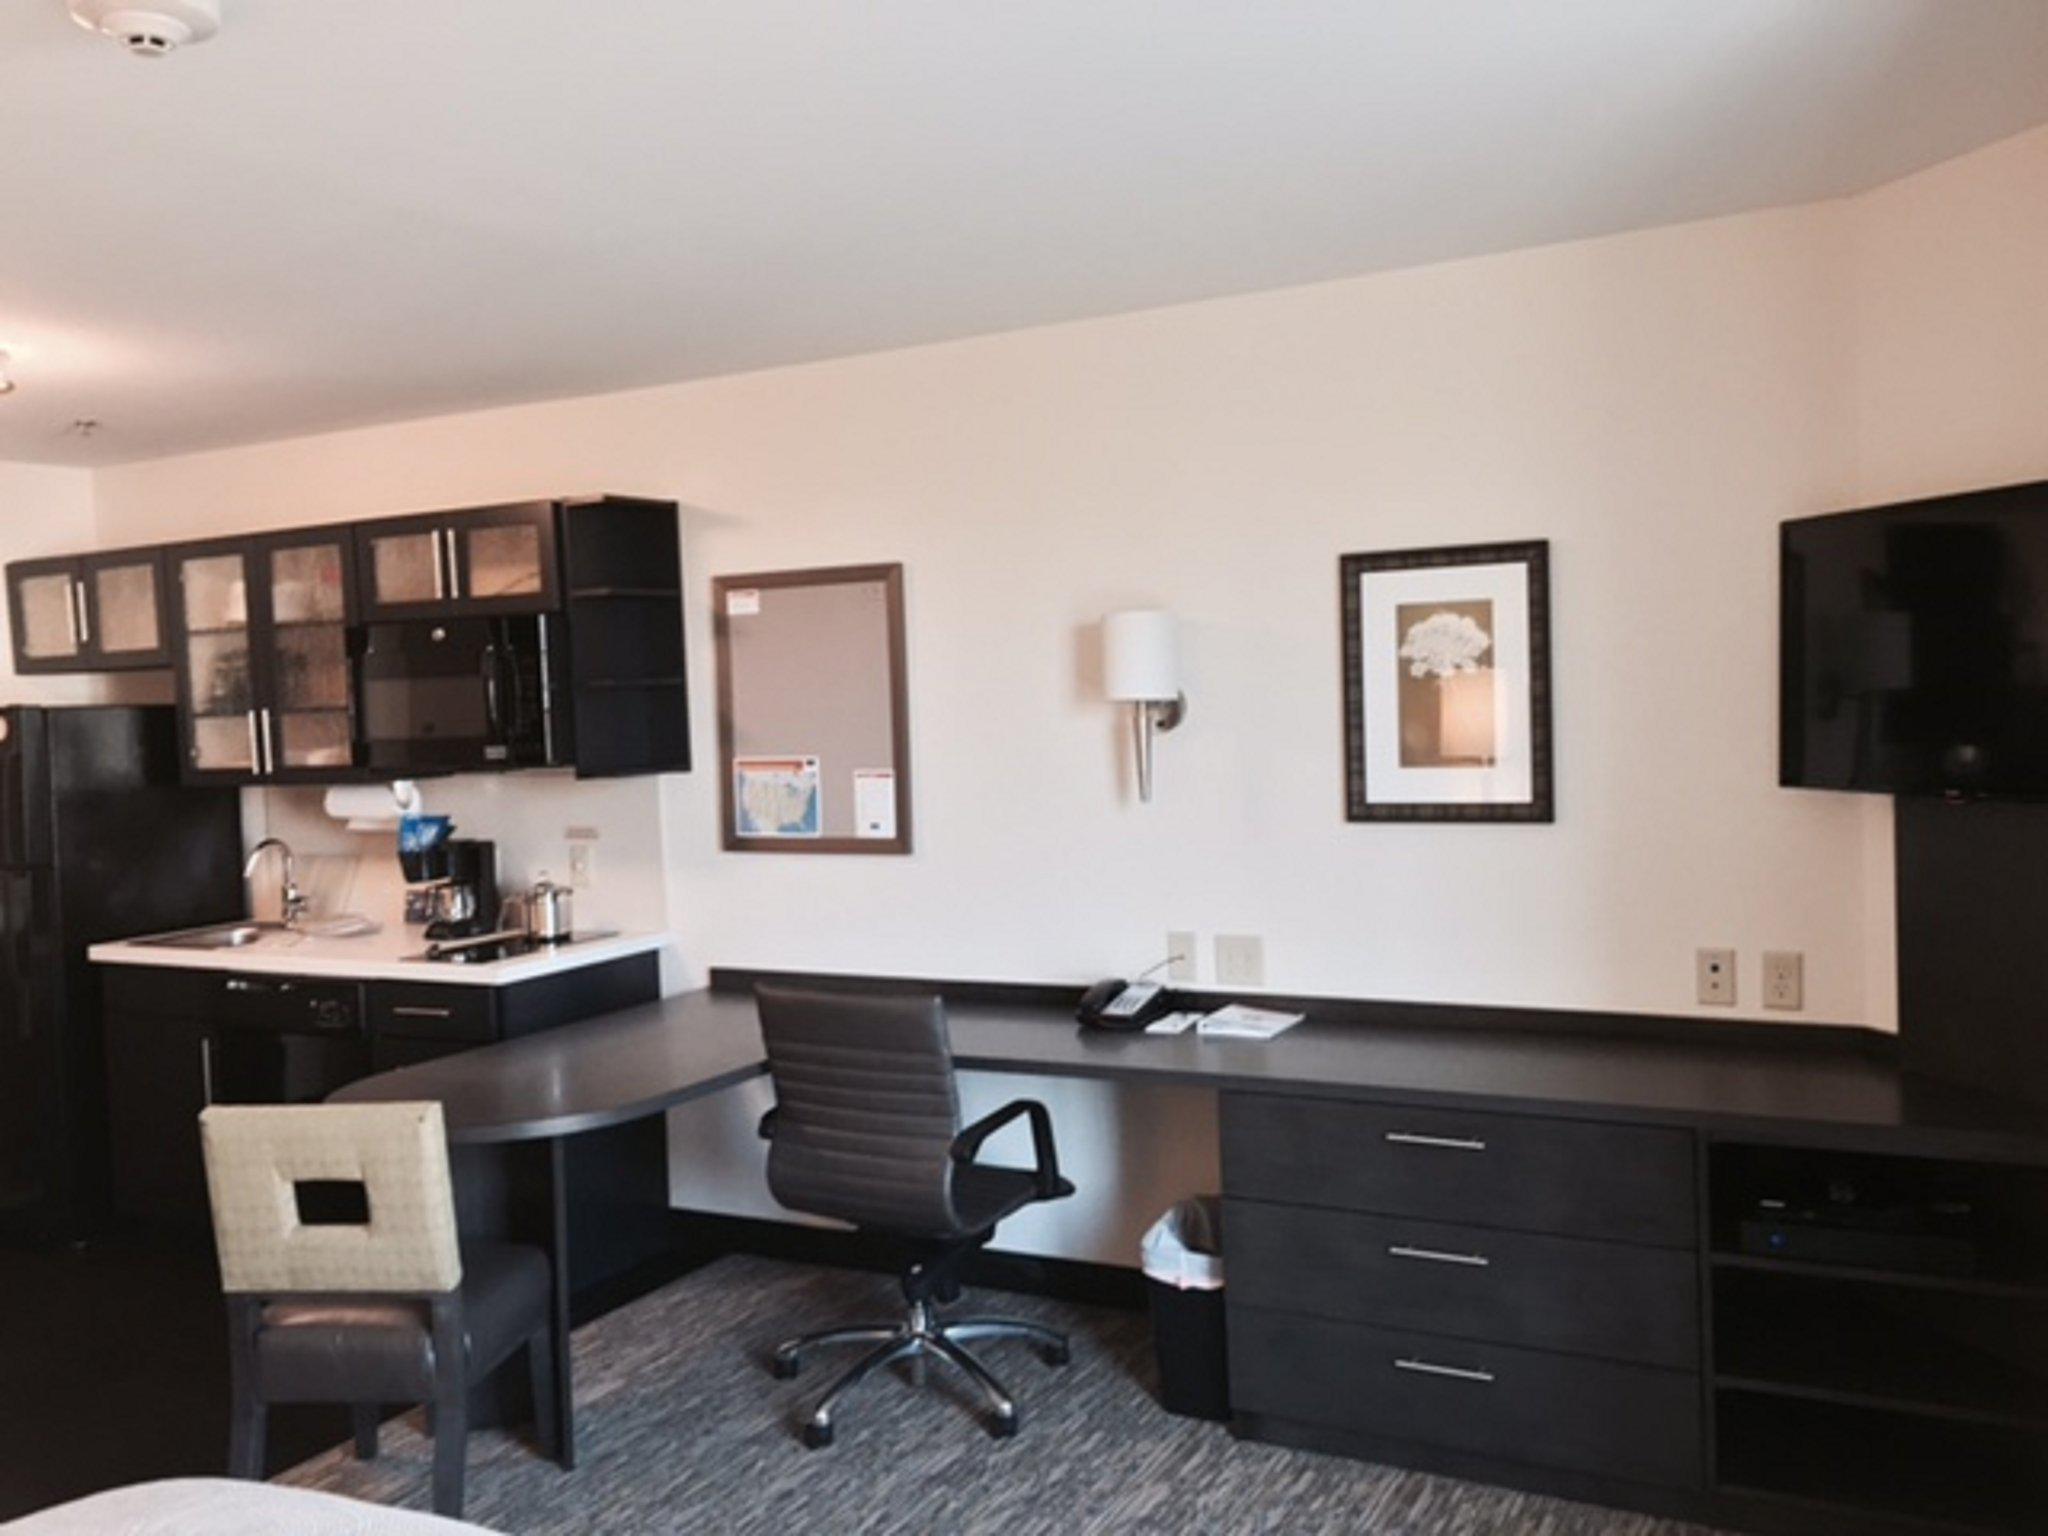 Candlewood Suites Youngstown West - Austintown Photo